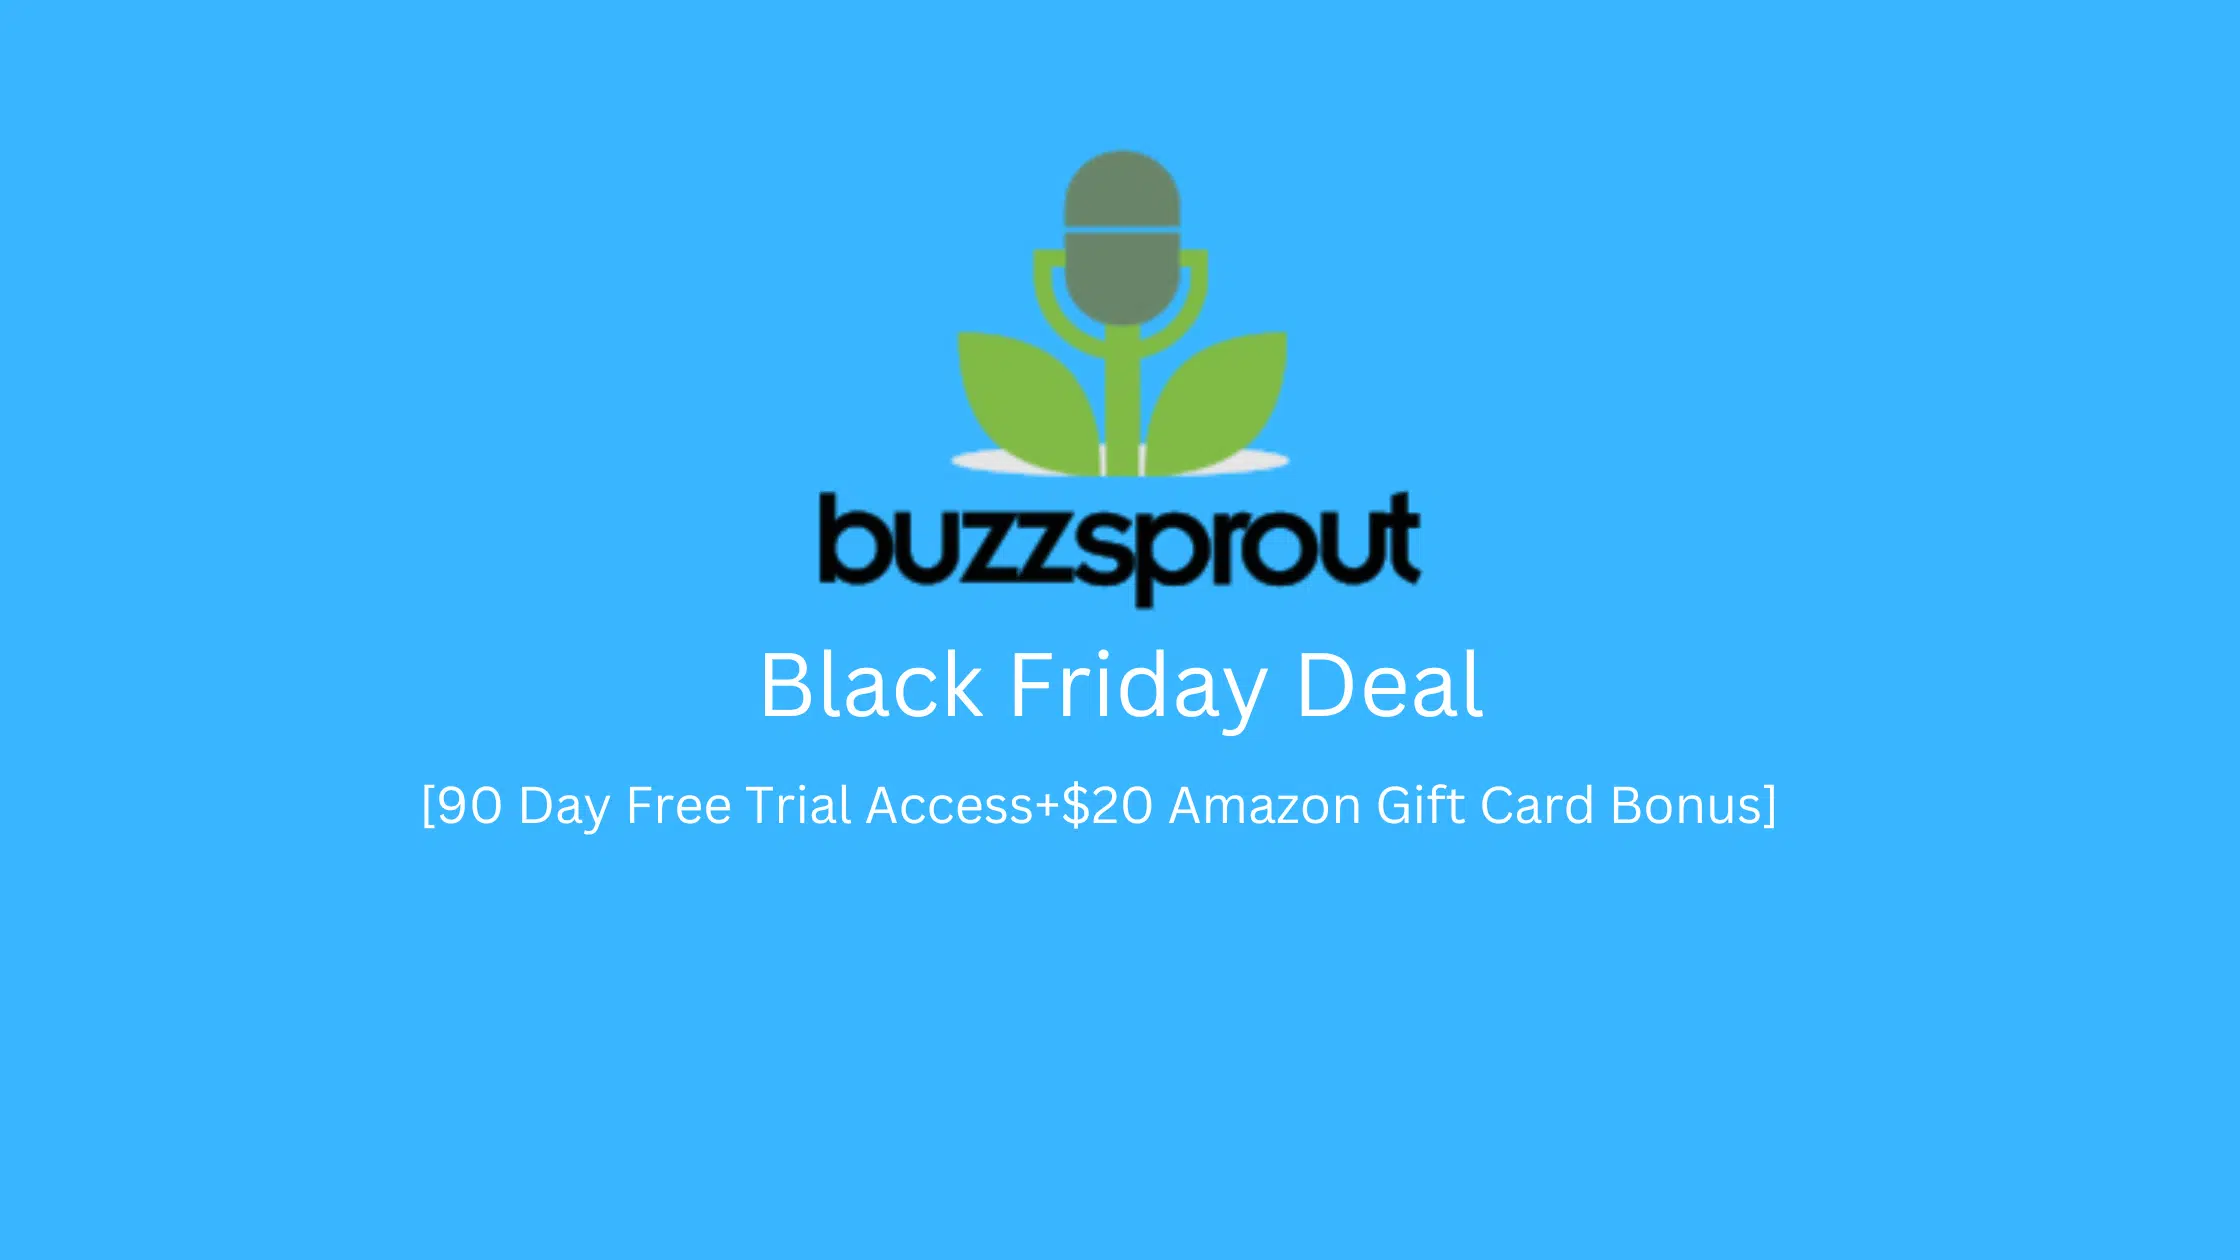 Buzzsprout Black Friday Deal